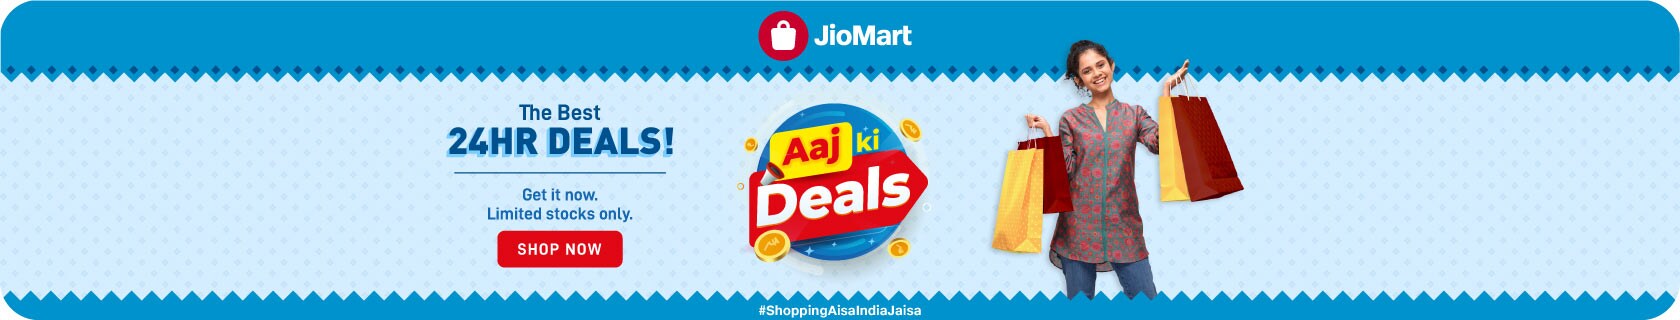 home_all_aajkideals_web